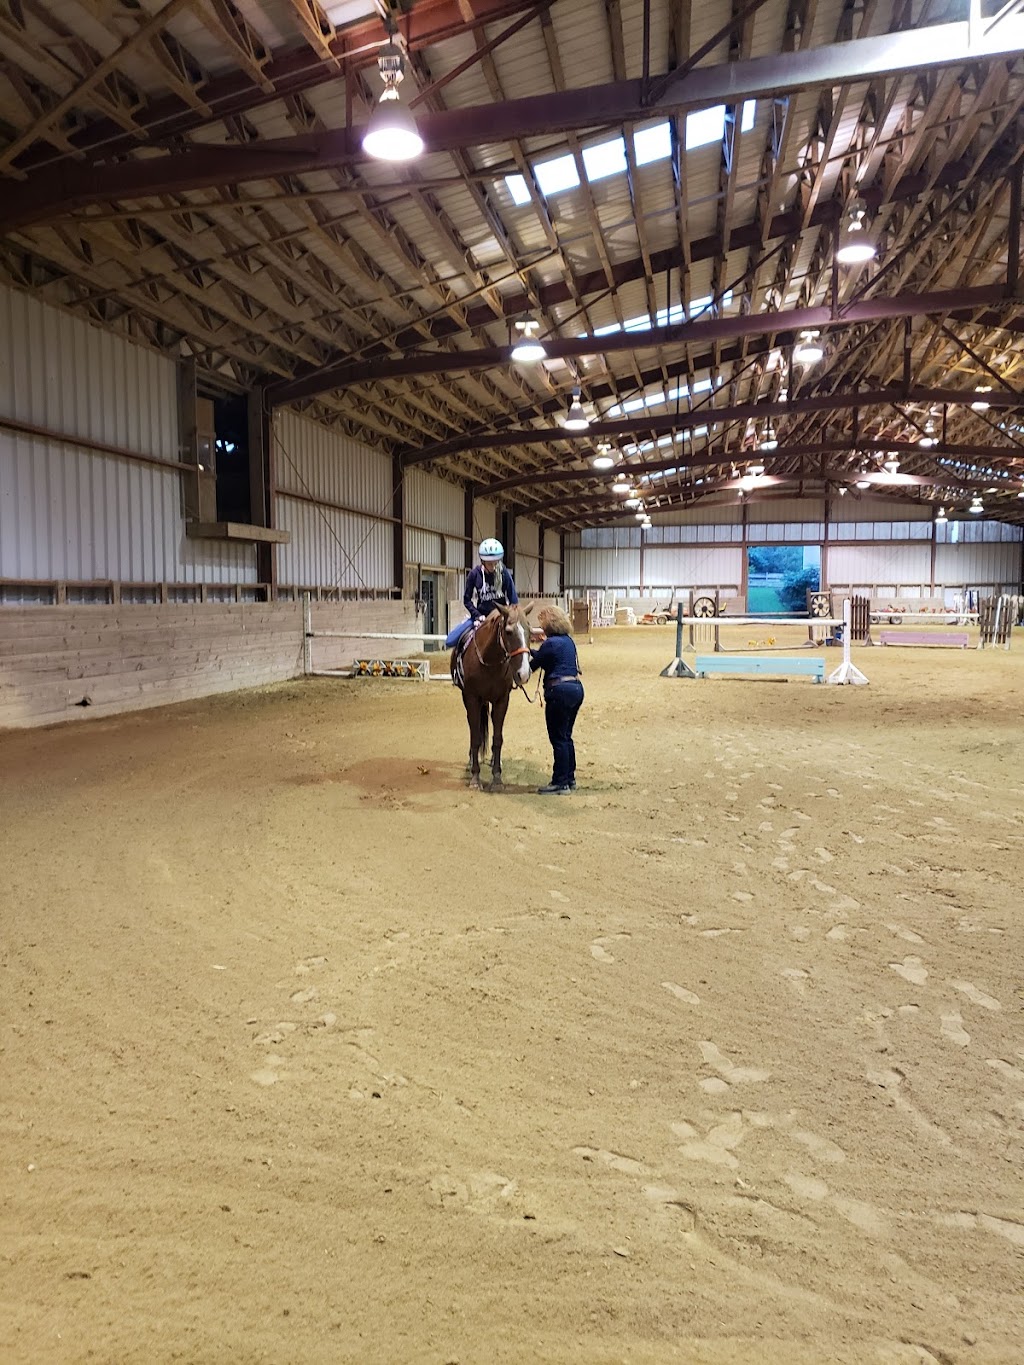 Greylyn Show Stable and Riding Academy | 790 Darby Paoli Rd, Berwyn, PA 19312 | Phone: (484) 566-9440